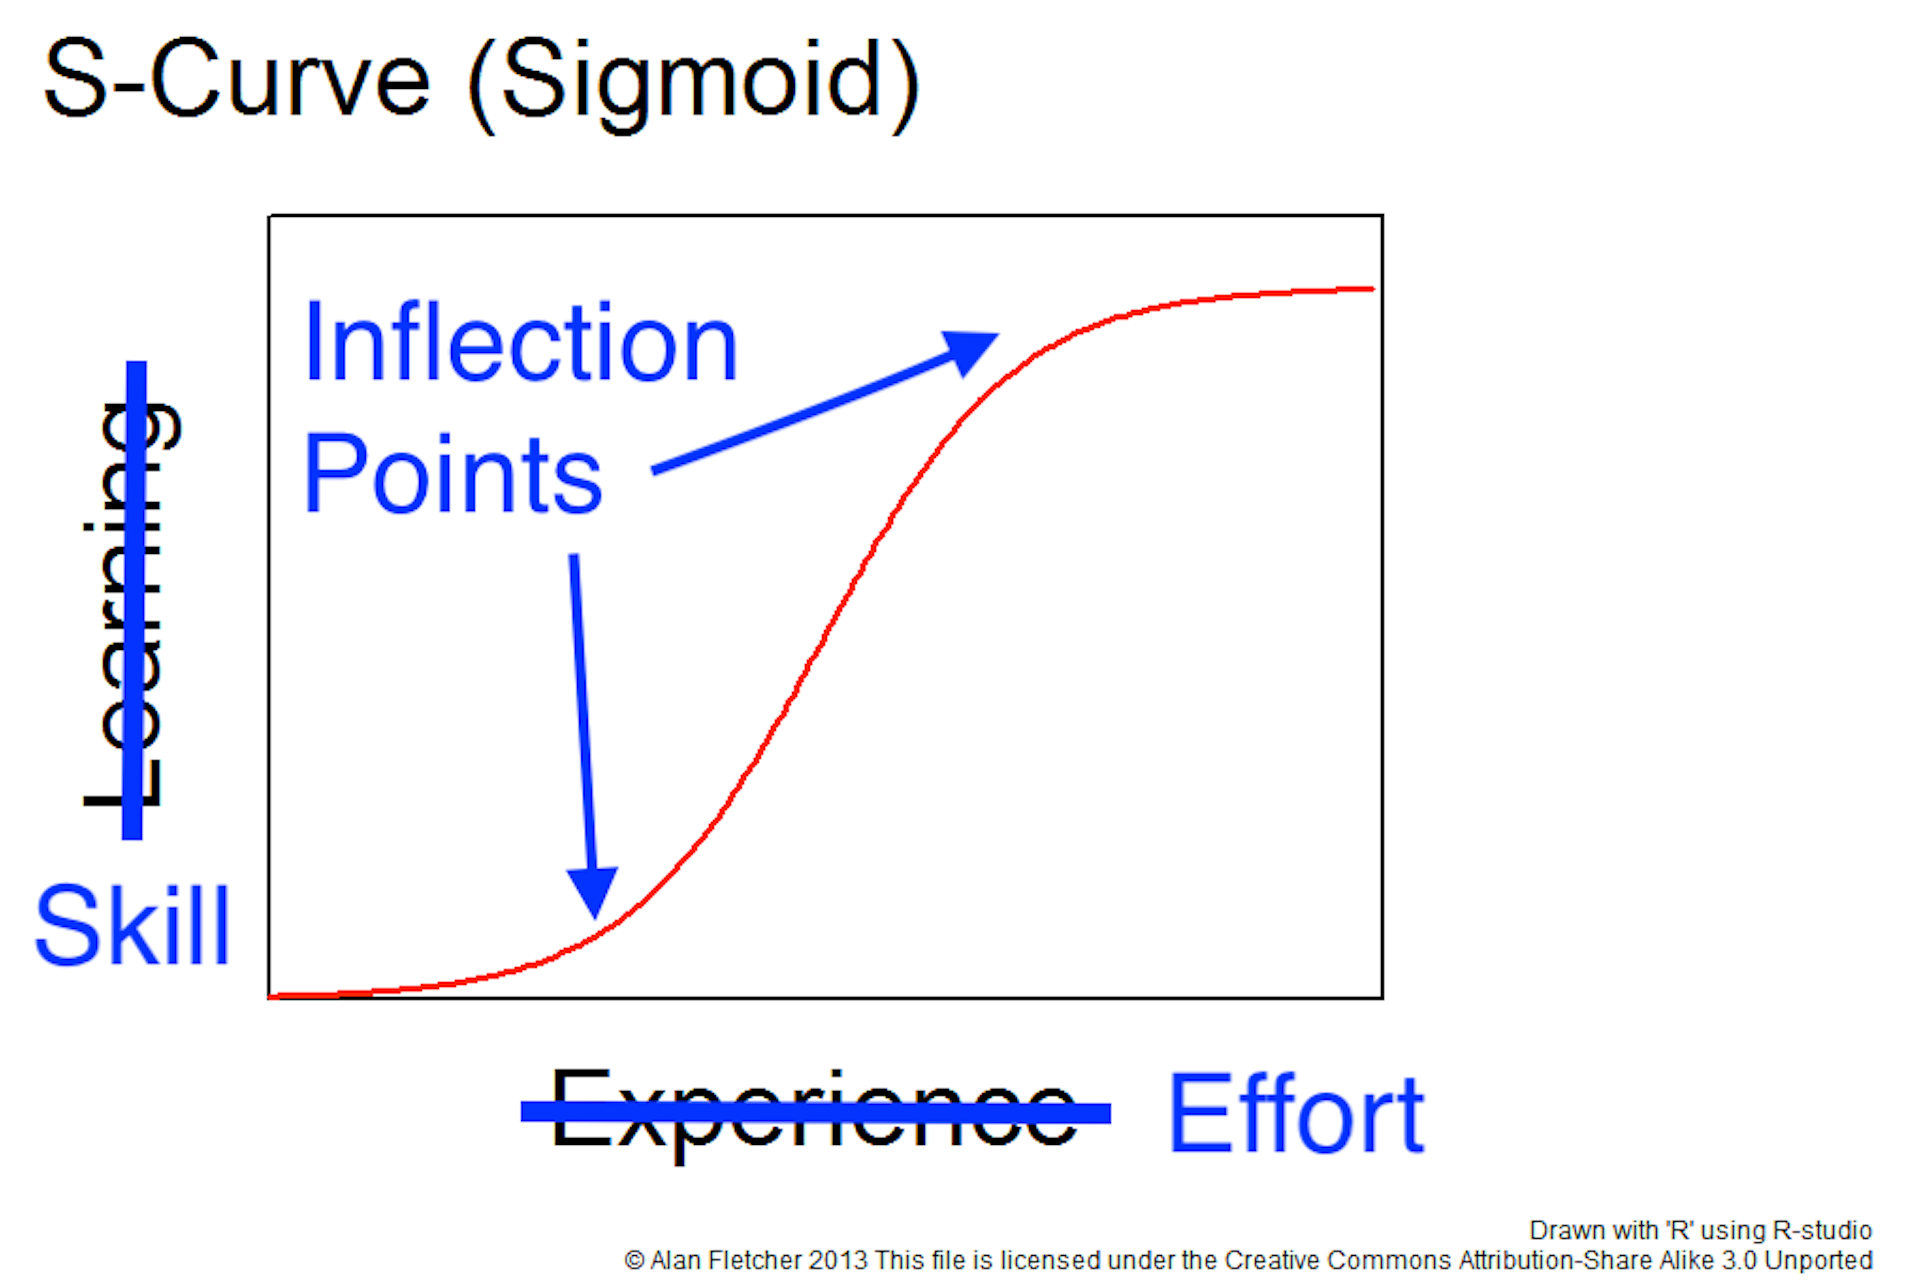 A sigmoid curve that rises as it goes to the left. The Y axis was originally labeled 'learning' but that has been struck out replaced by the term 'skill'. The X axis was originally labeled 'experience' but has been replaced by 'effort'. The areas where the curve starts bends—first upward and then towards a flat trajectory—have been labeled as 'inflection points'